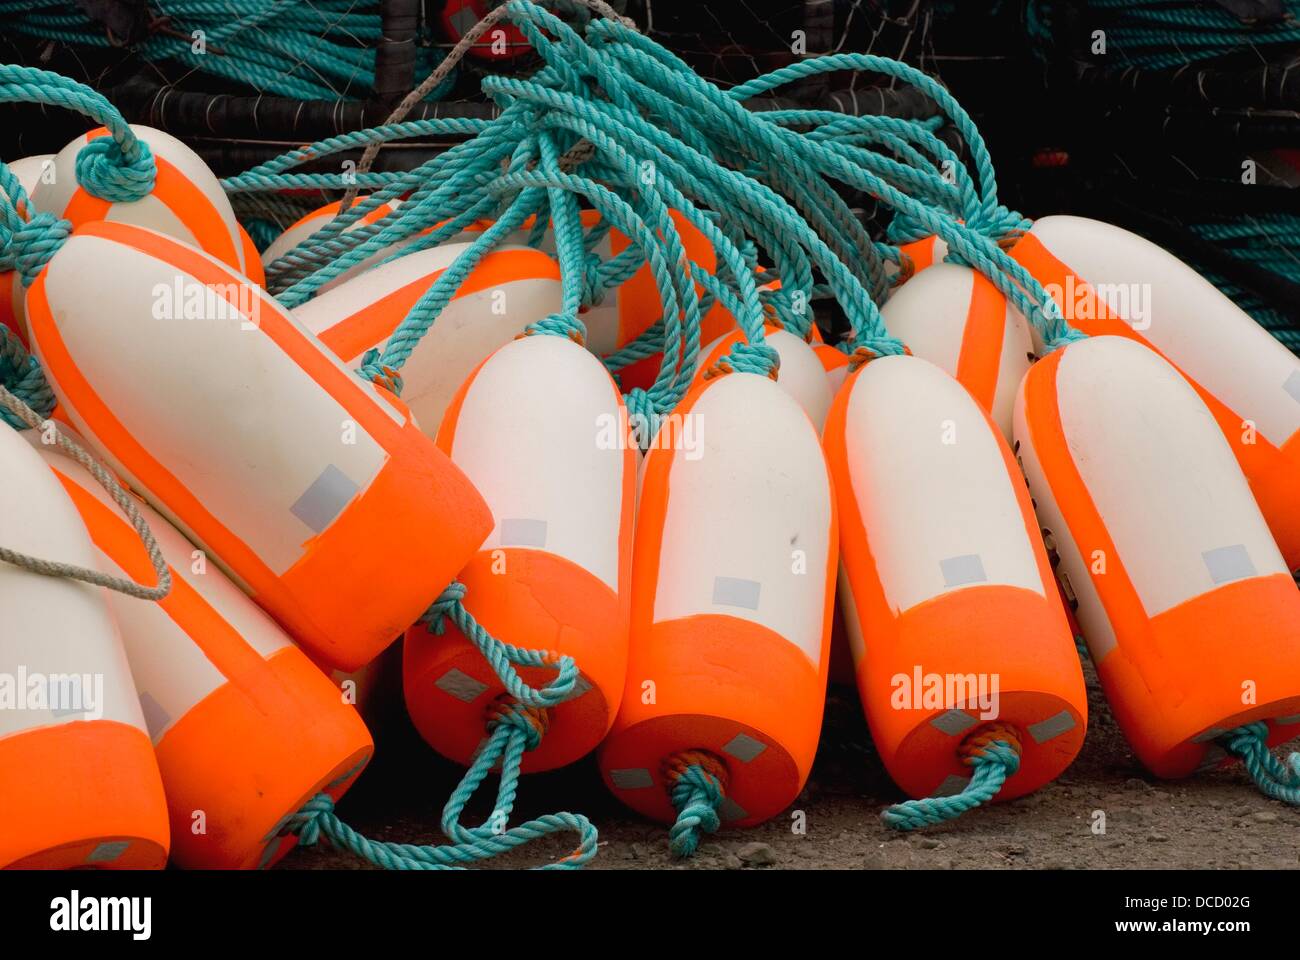 https://c8.alamy.com/comp/DCD02G/new-buoys-for-crab-traps-near-commercial-fishing-harbor-brookings-DCD02G.jpg